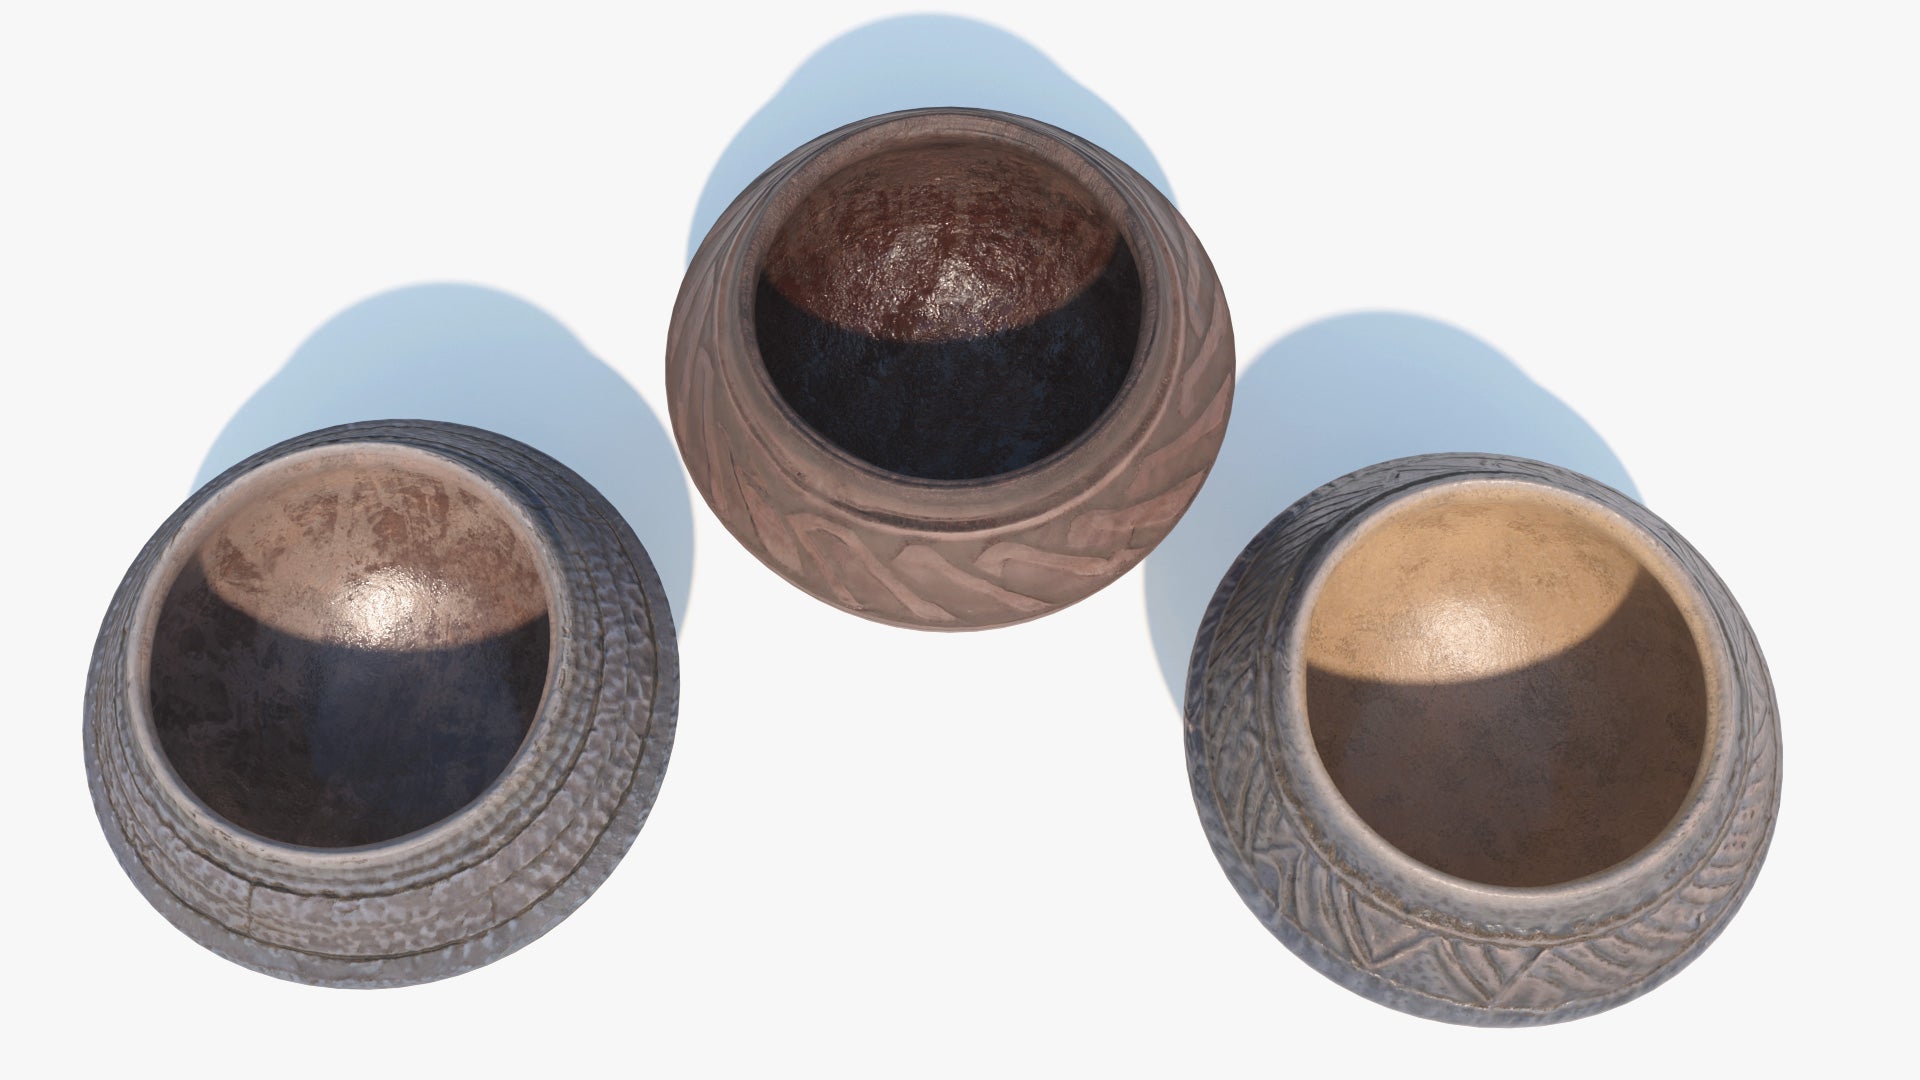 3D model of three almond shaped clay vessels, as seen from the top, two of the rough and one of them painted with enamel, they have very rich textures that seem scratchy but also smooth. Low polycount and PBR textures make the render look hyper realistic